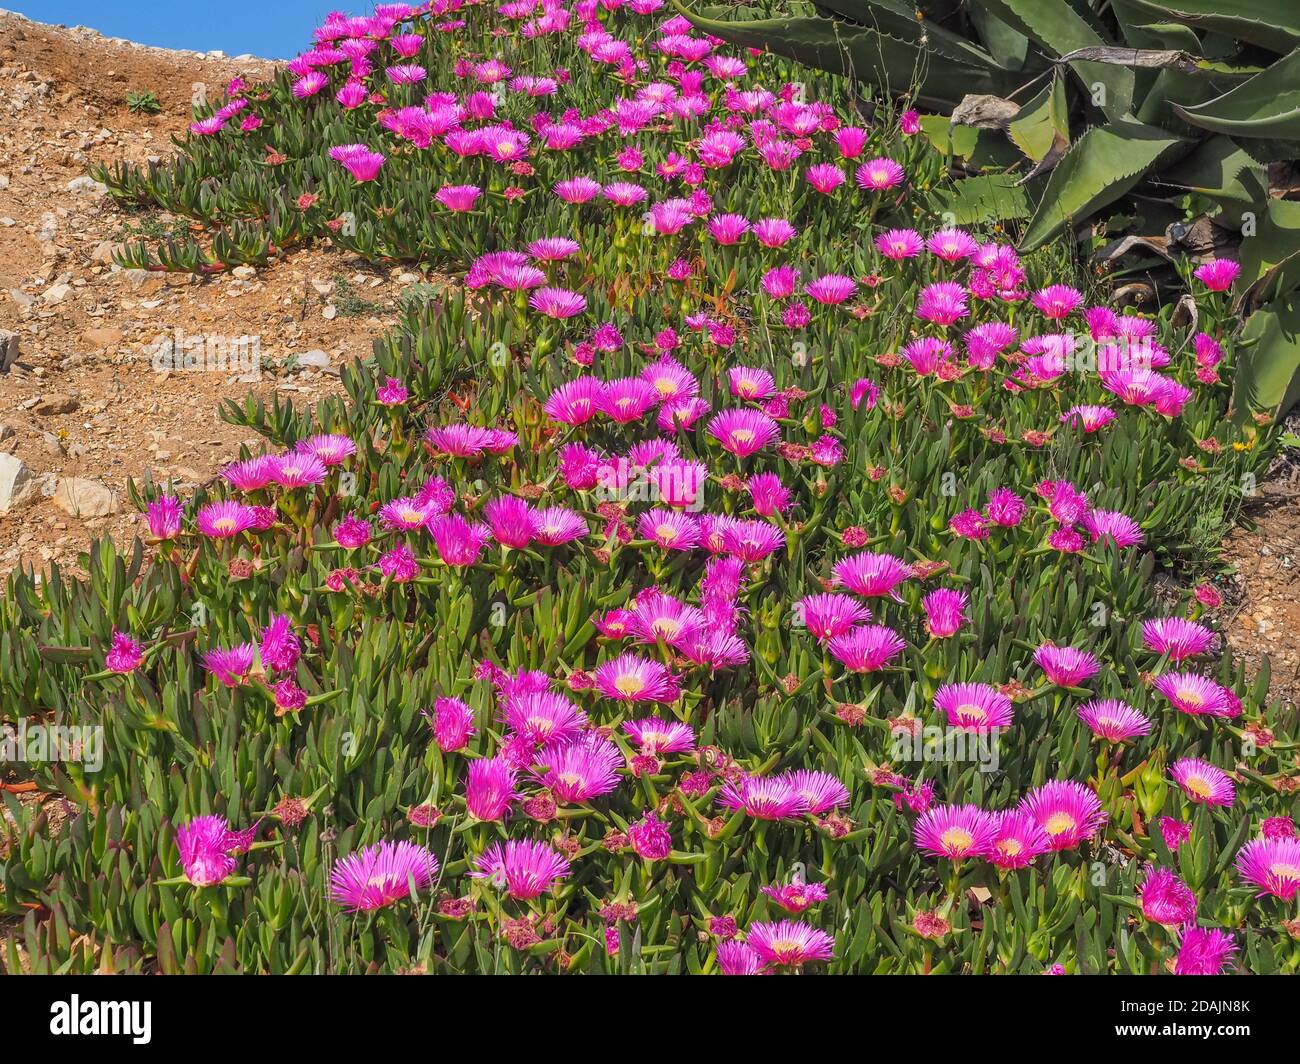 Floral background. Field of pink blooming sea fig flowers. Carpobrotus chilensis, ground creeping plant with succulent leaves in the family Aizoaceae. Stock Photo